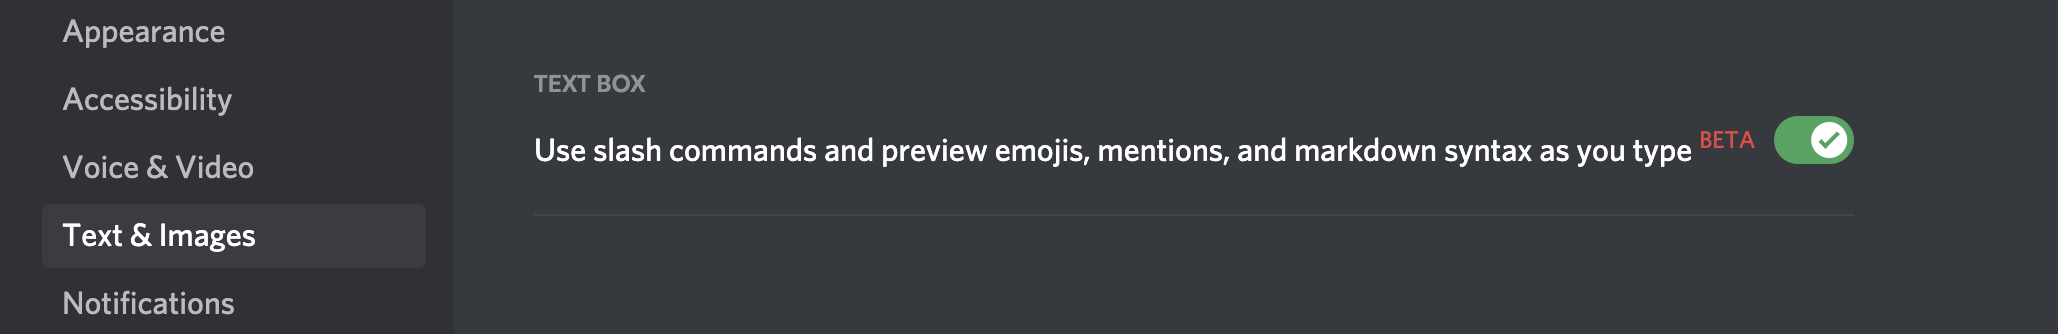 Use slash commands and preview emojis, mentions, and markdown syntax as you type